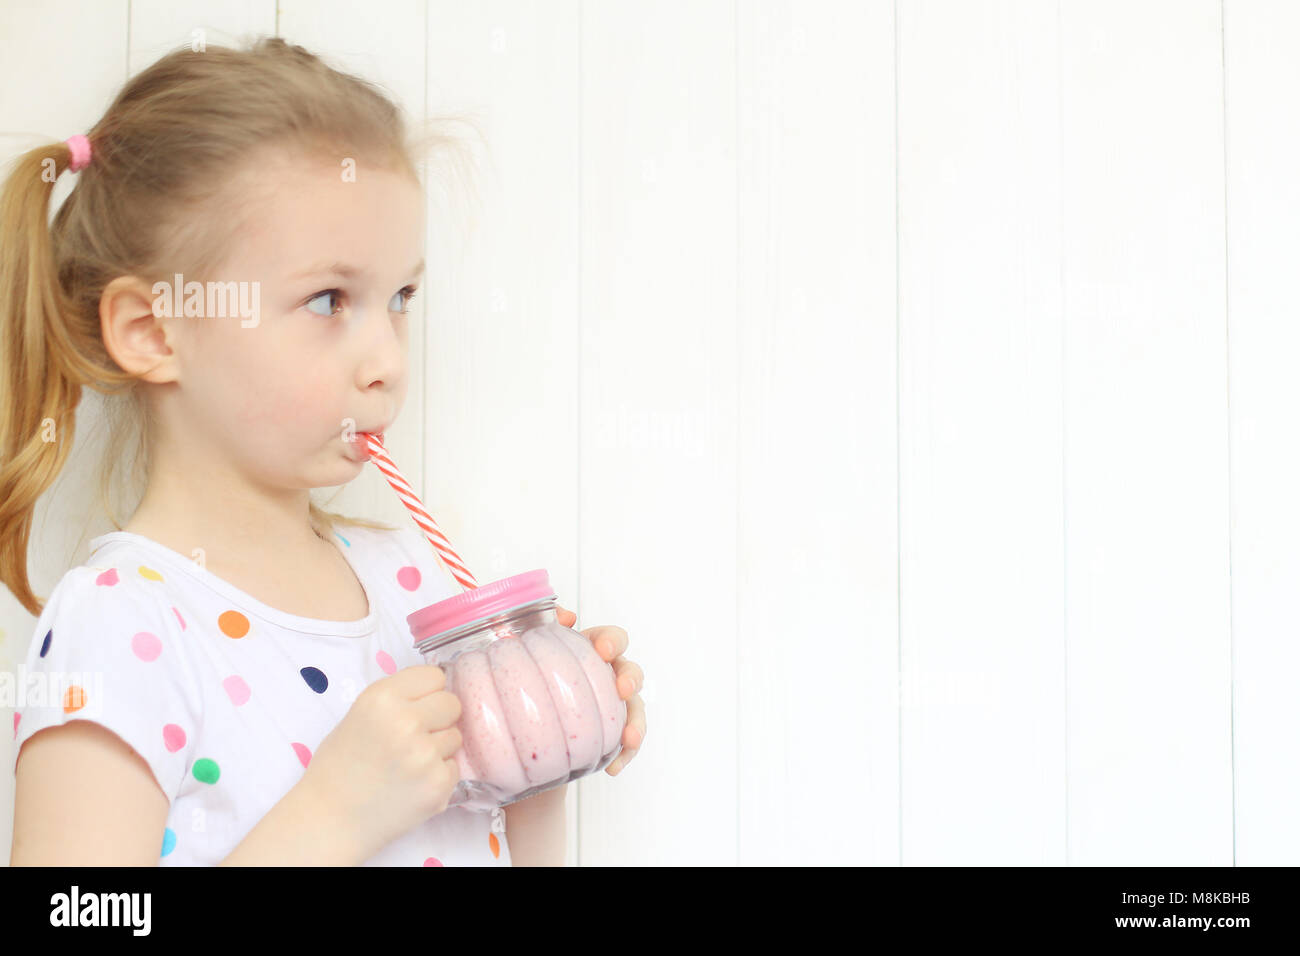 Belle girl drinking smoothie shake Banque D'Images